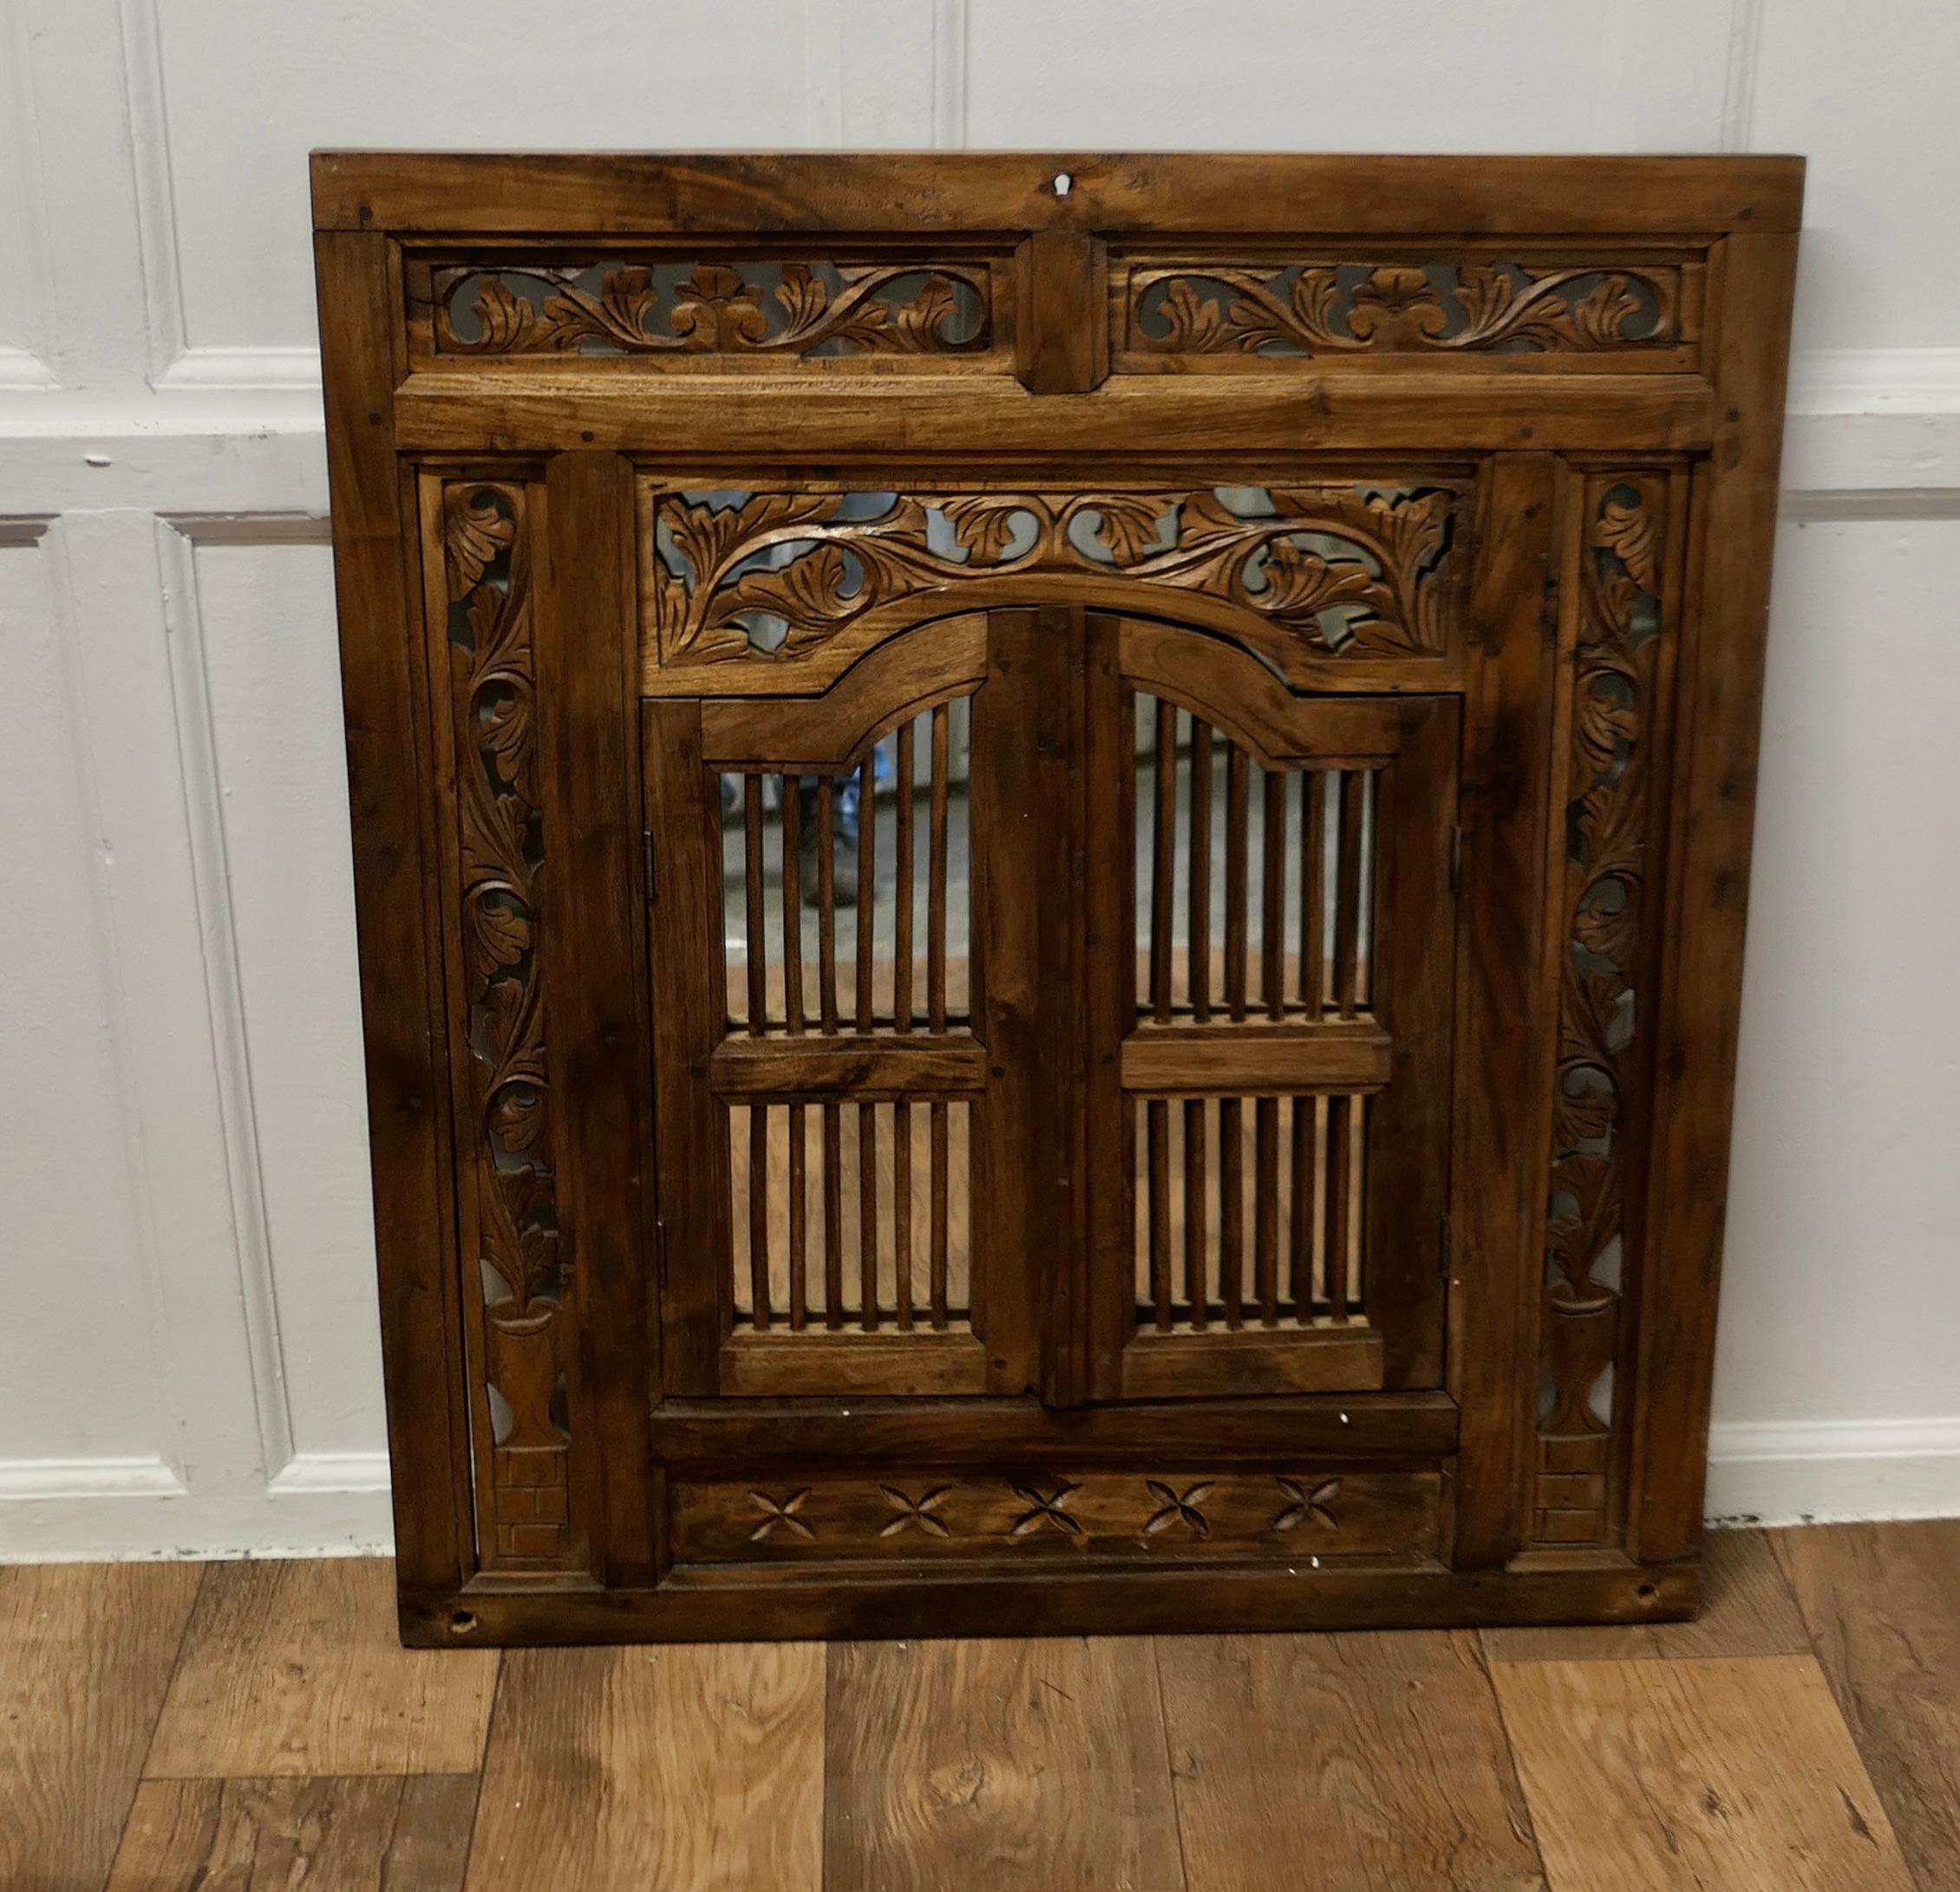 Wall Mirror Concealed by Heavy Carved Teak Door Shutters

This very attractive Carved Teak Double Door Frame conceals a mirror
The pair of doors have metal hinges and a wooden closer
A very sound and attractive piece 
The frame is 35” tall, 32” wide